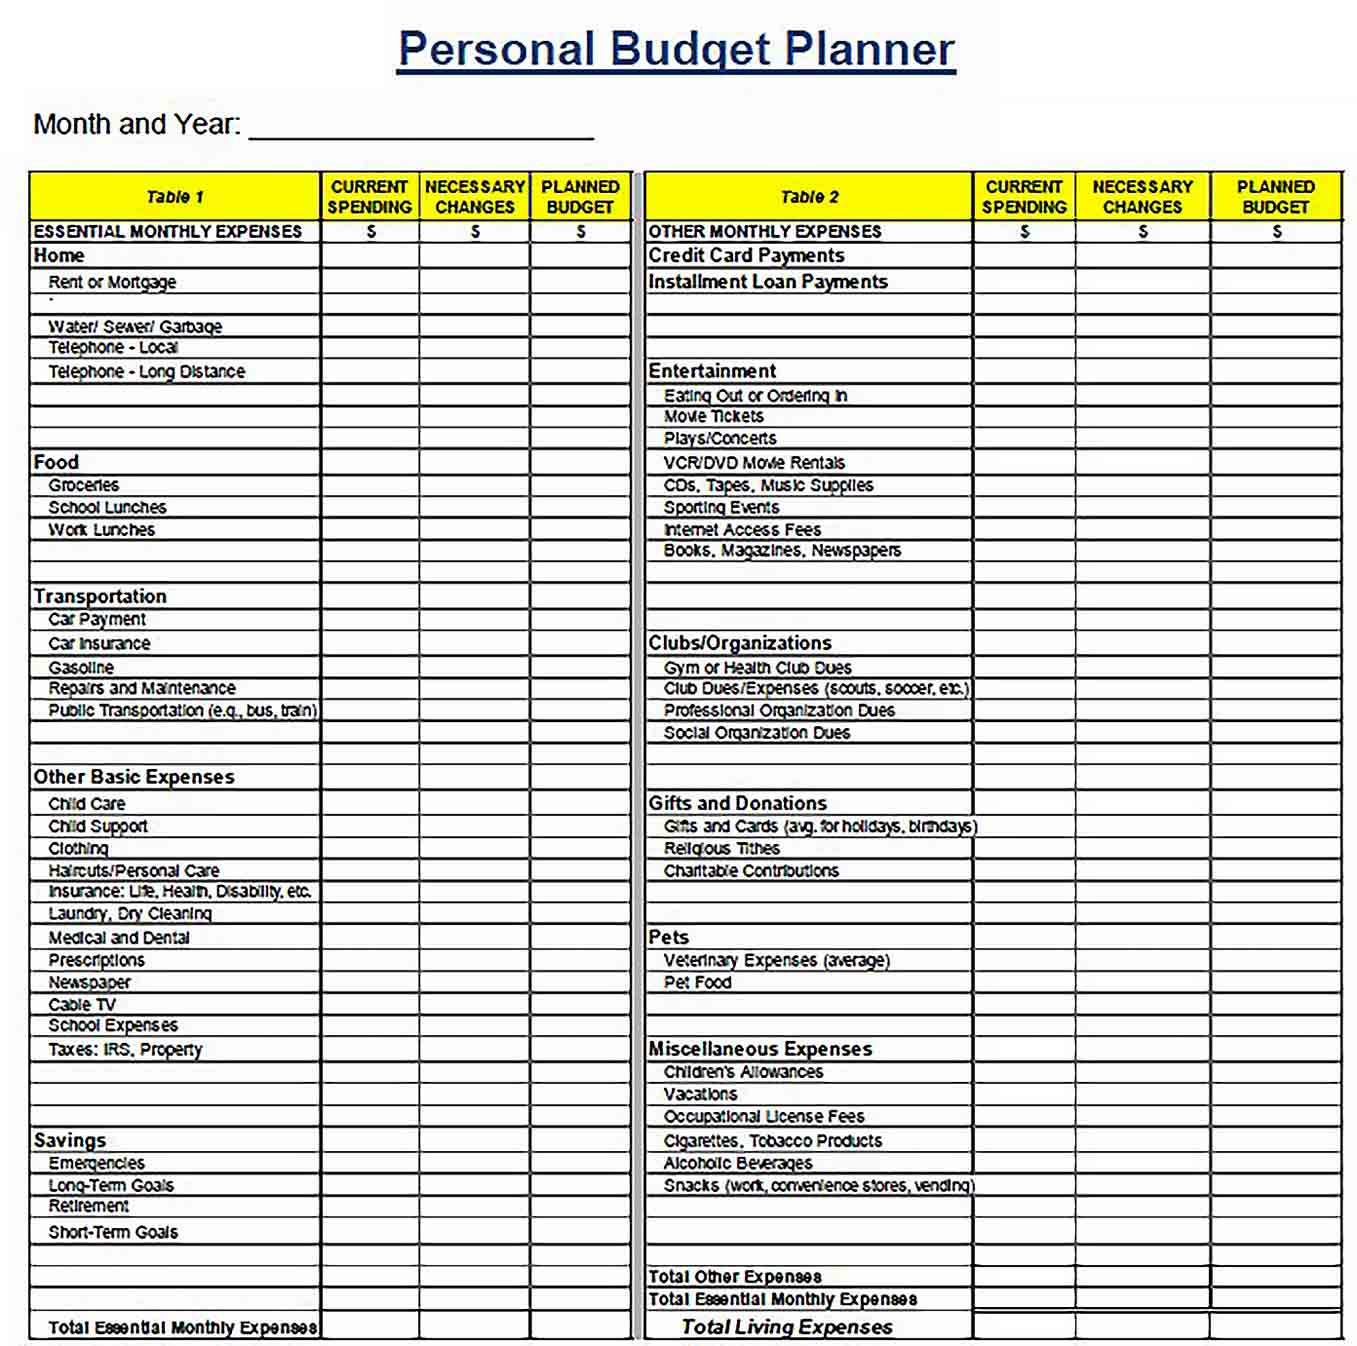 Free Personal Budget Template | Culturopedia intended for Free Budget Planner Template Word